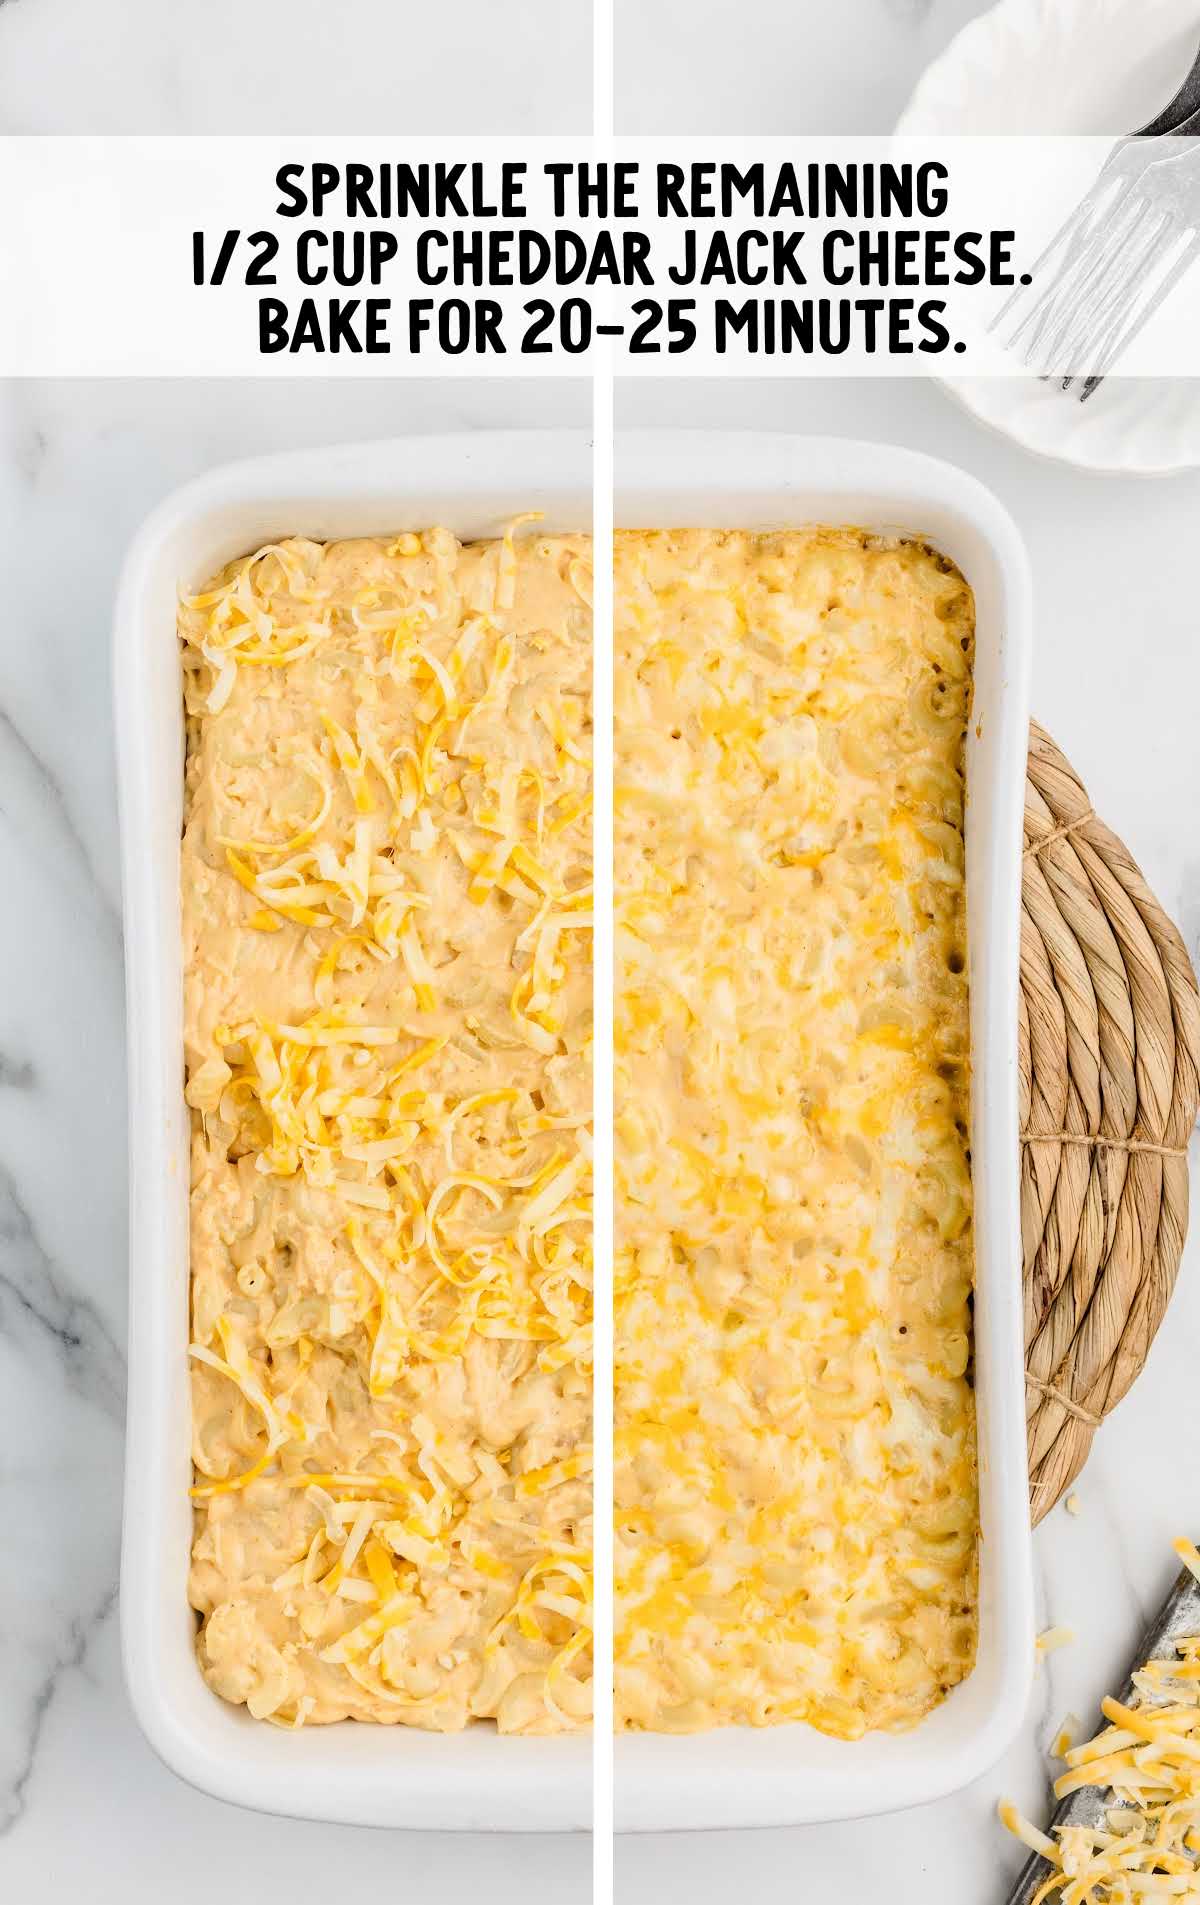 colby jack cheese sprinkled on top of the noodles then baked in the baking dish